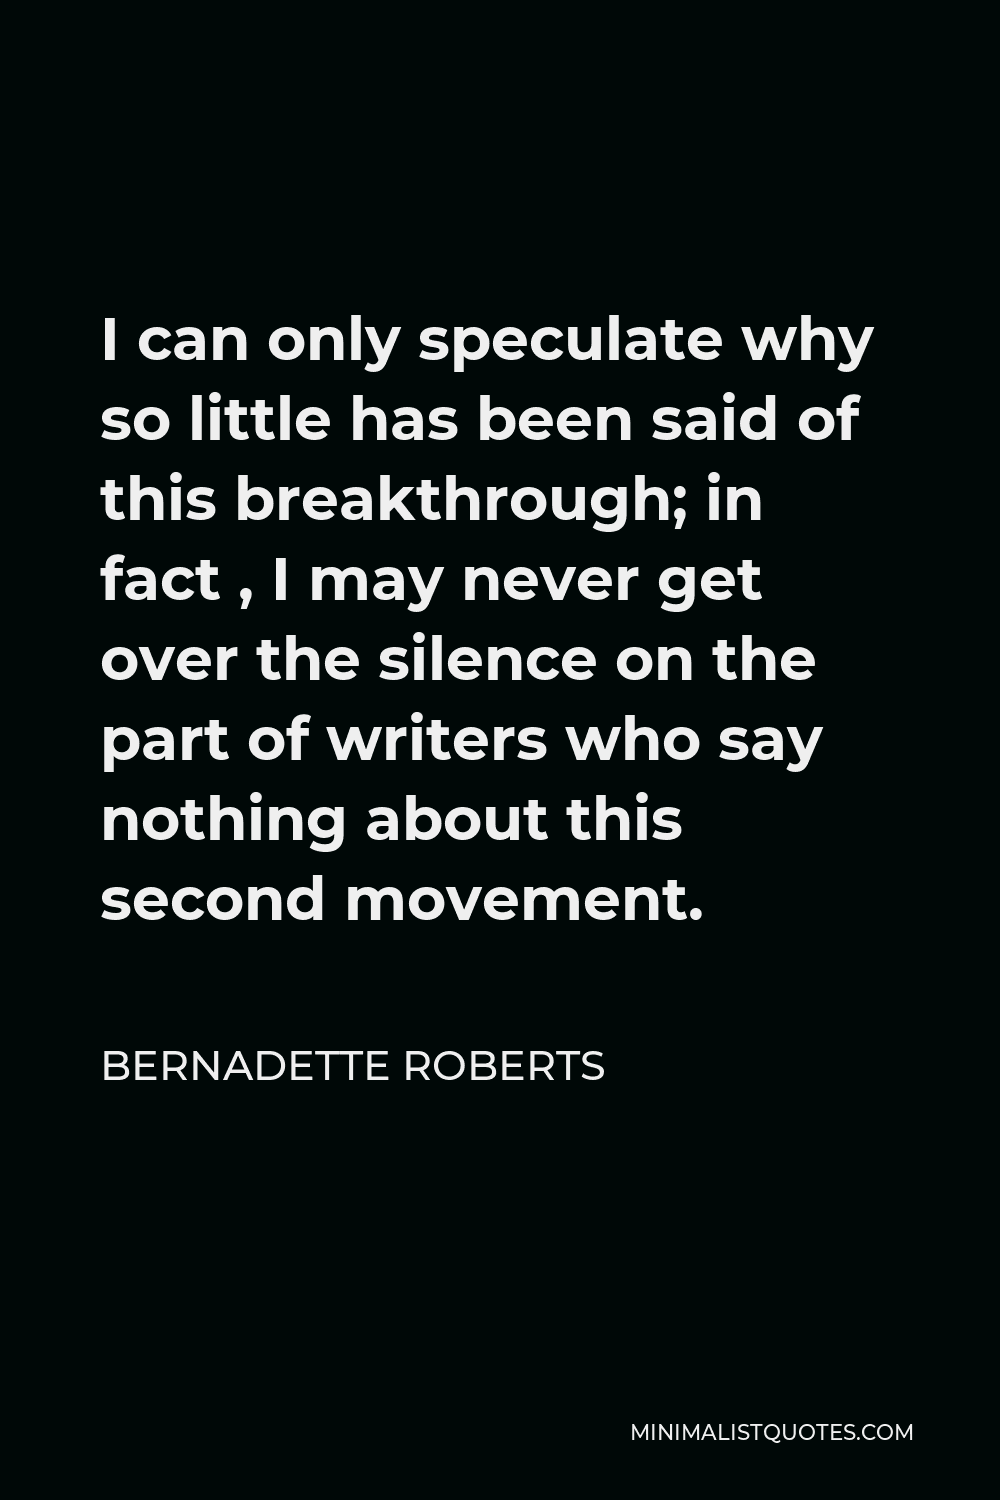 Bernadette Roberts Quote - I can only speculate why so little has been said of this breakthrough; in fact , I may never get over the silence on the part of writers who say nothing about this second movement.